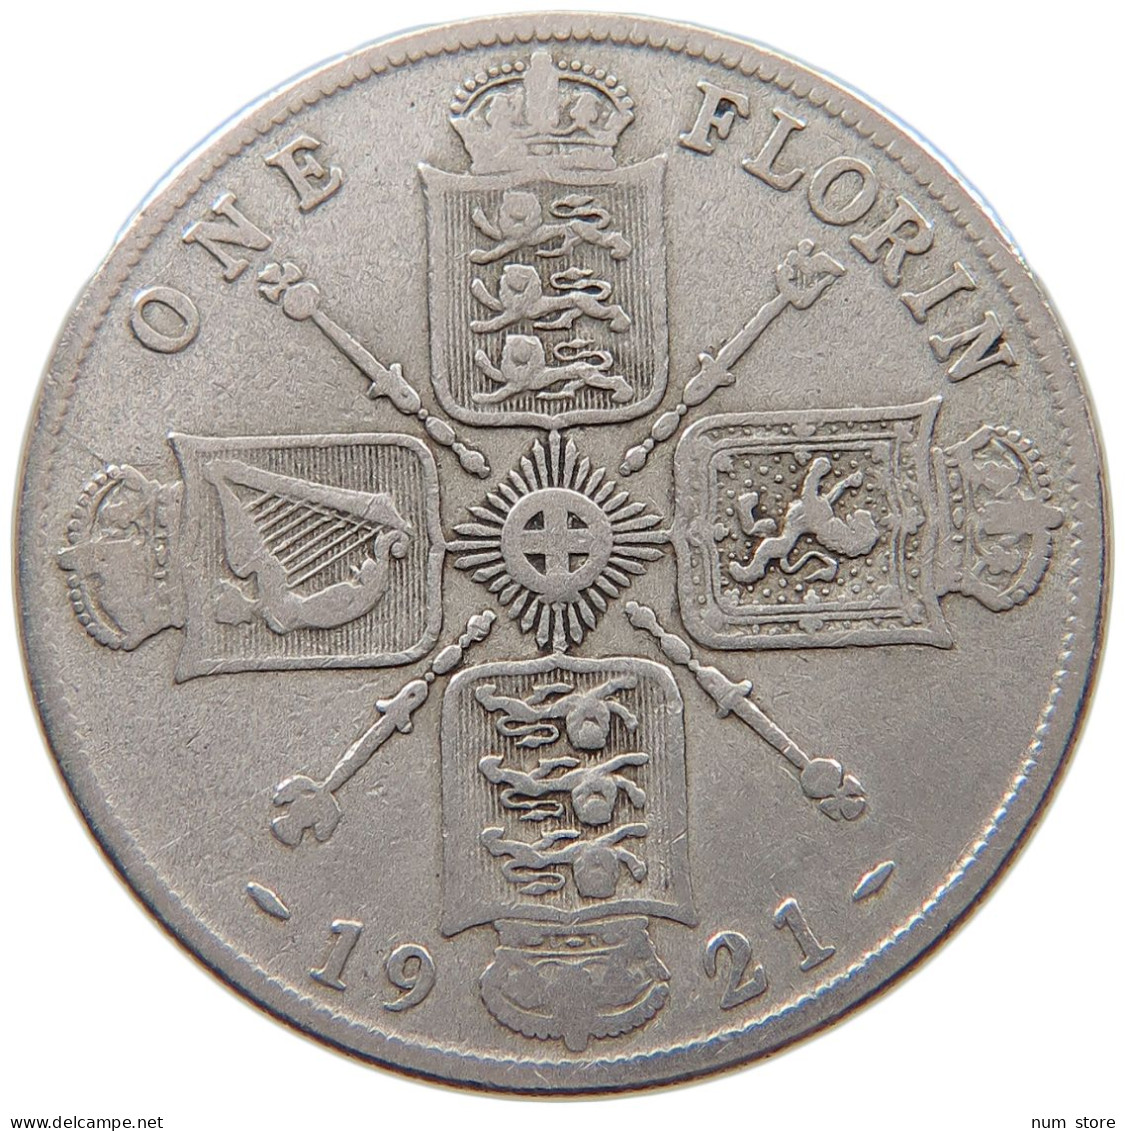 GREAT BRITAIN FLORIN 1921 George V. (1910-1936) #a057 0585 - J. 1 Florin / 2 Shillings